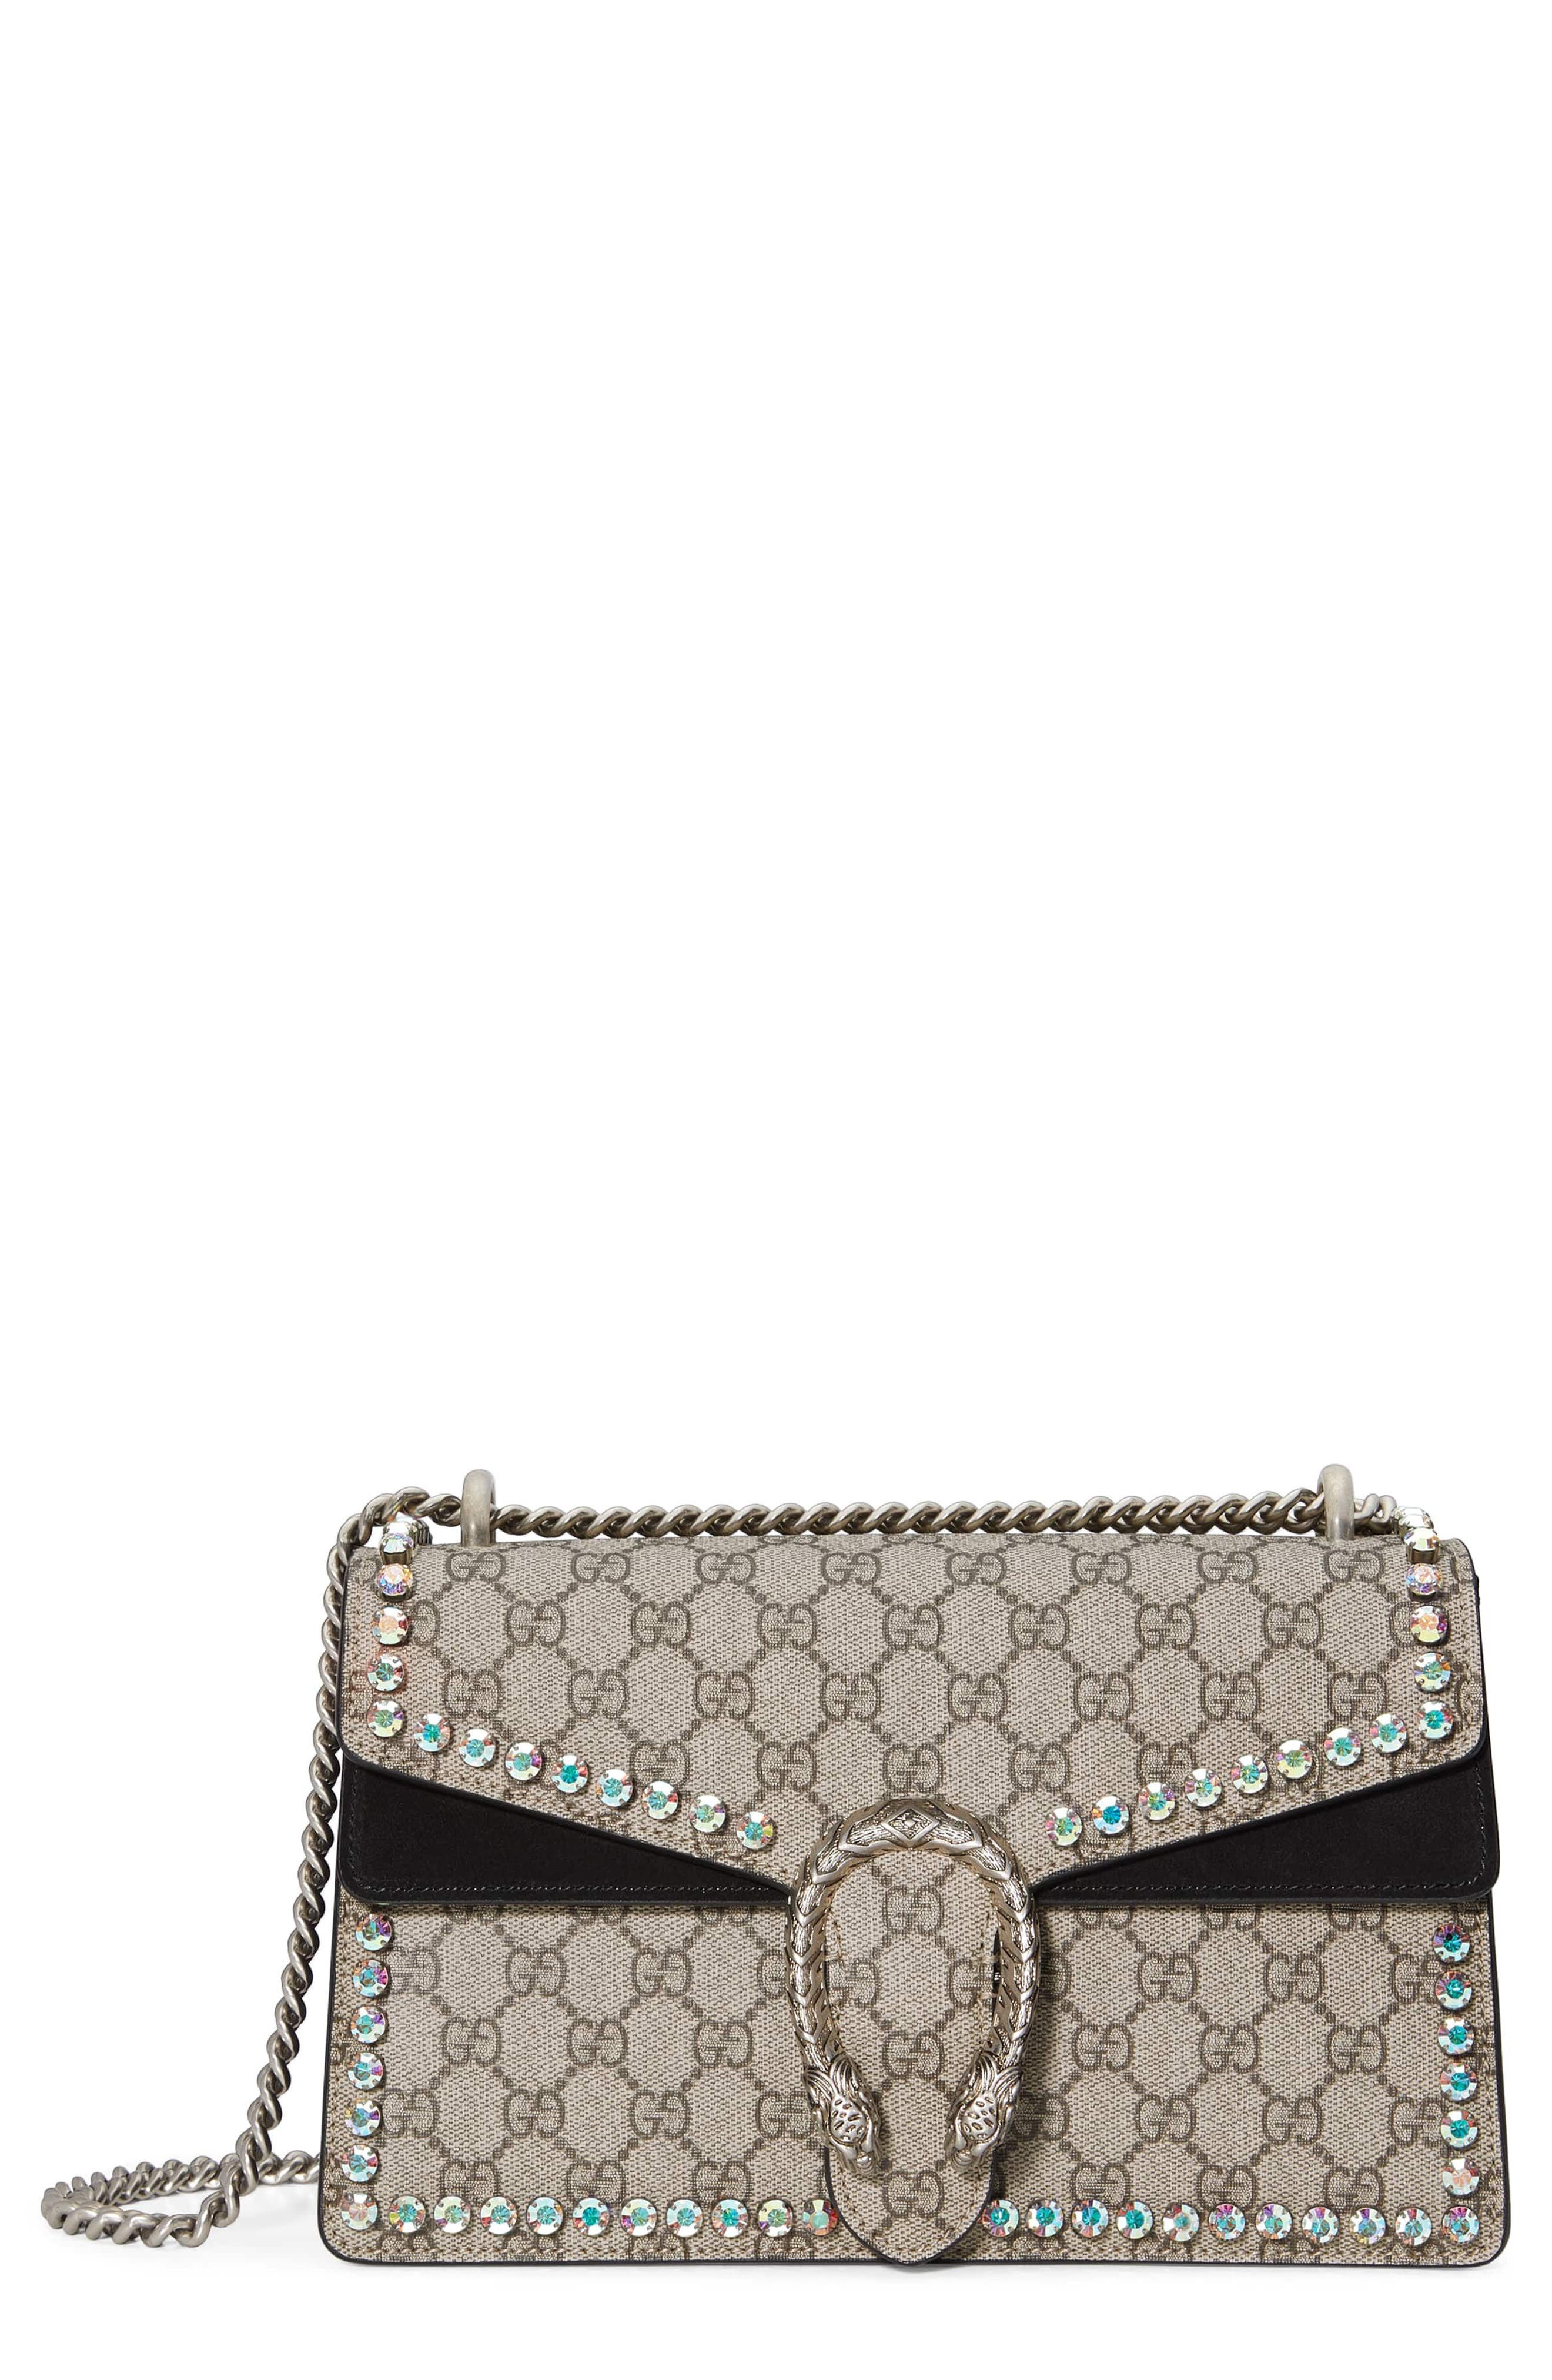 gucci dionysus bag with crystals